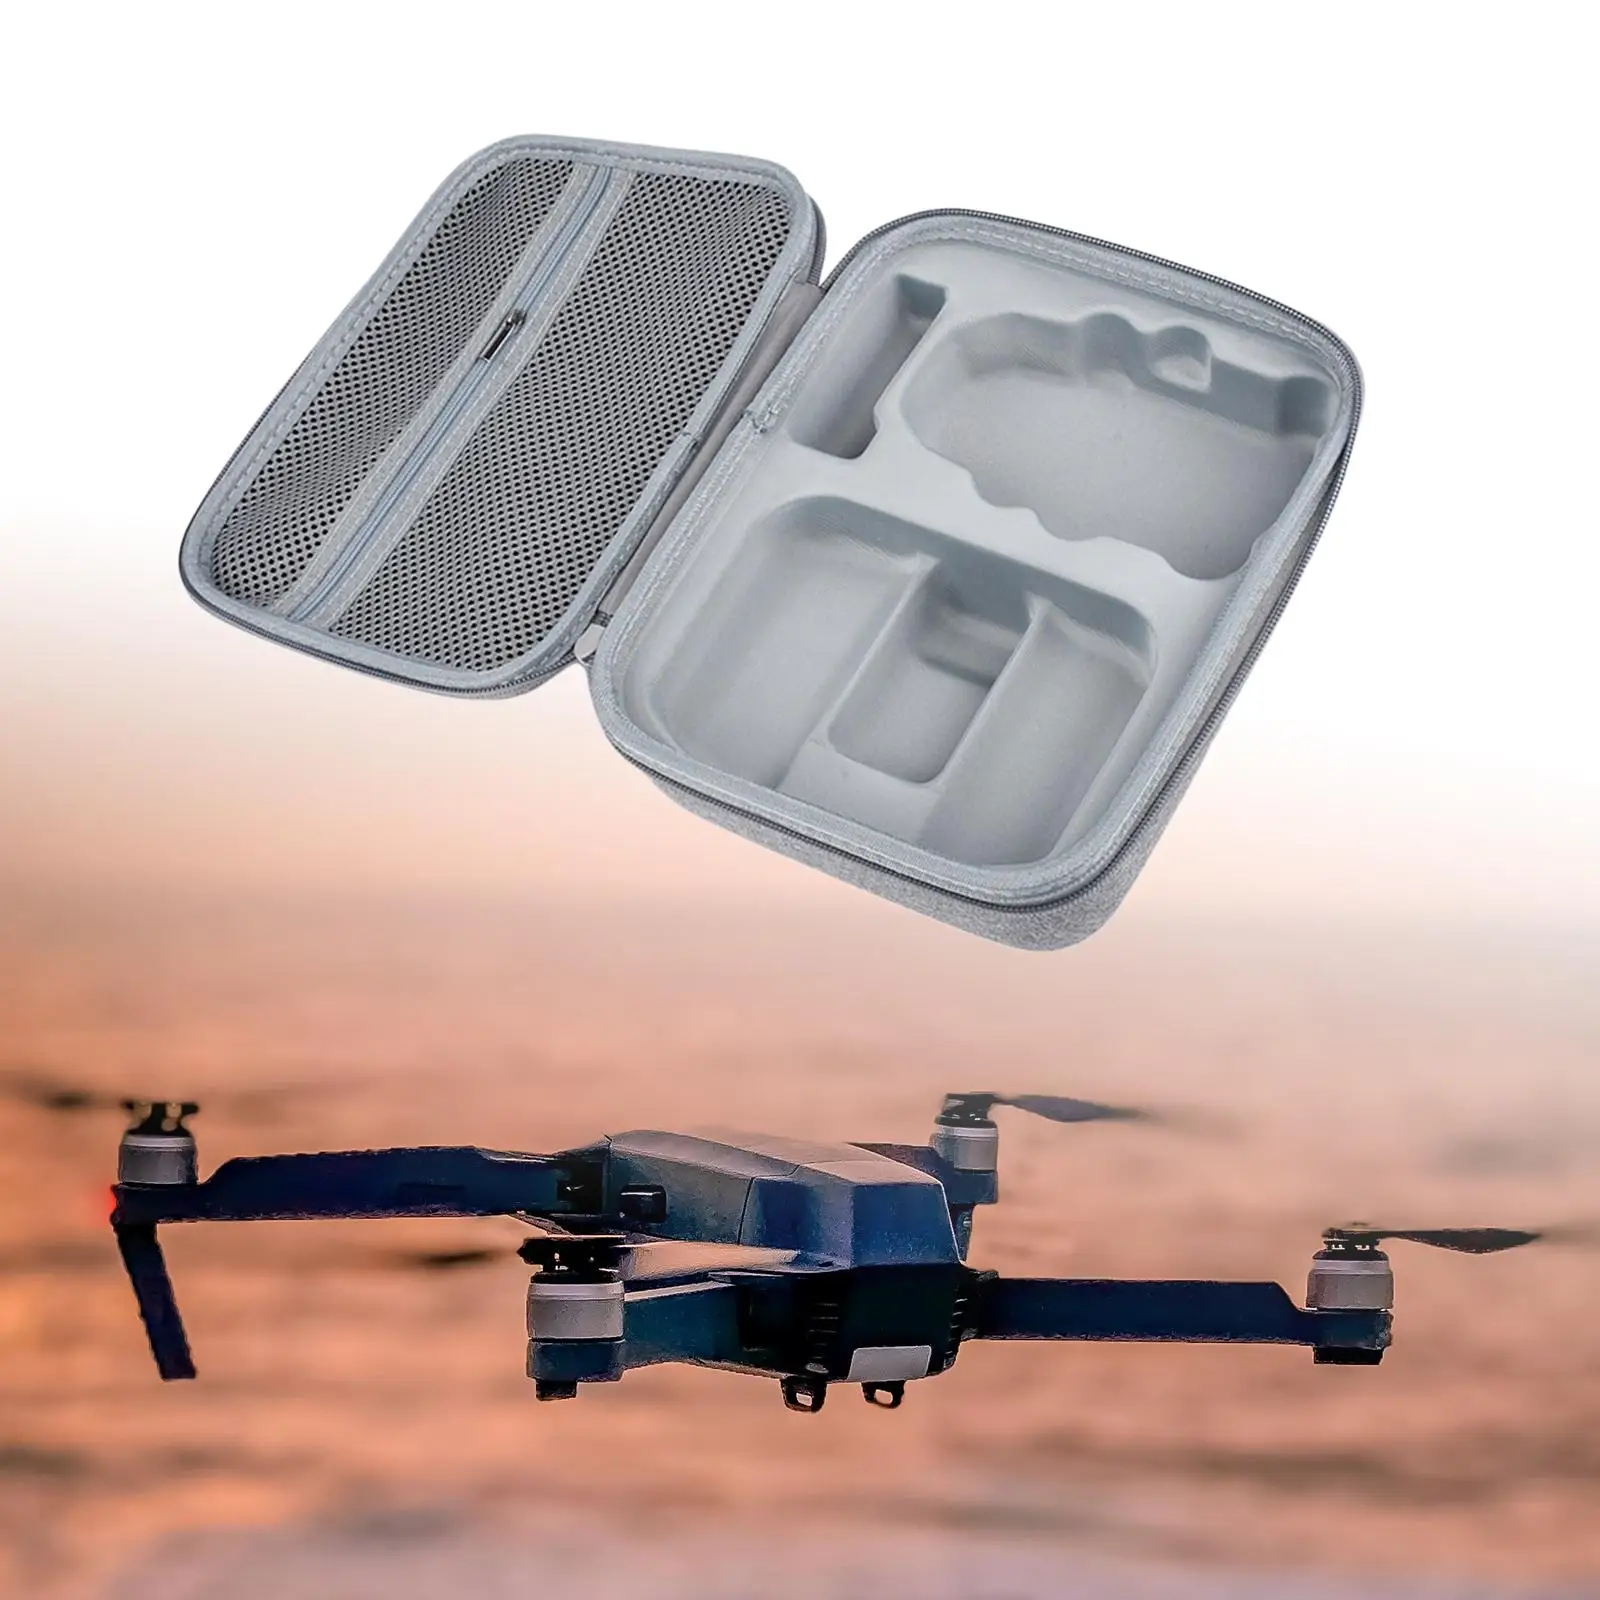 Drone Carrying Case Protective Case Storage Box for Mini 2 Quadcopter Parts